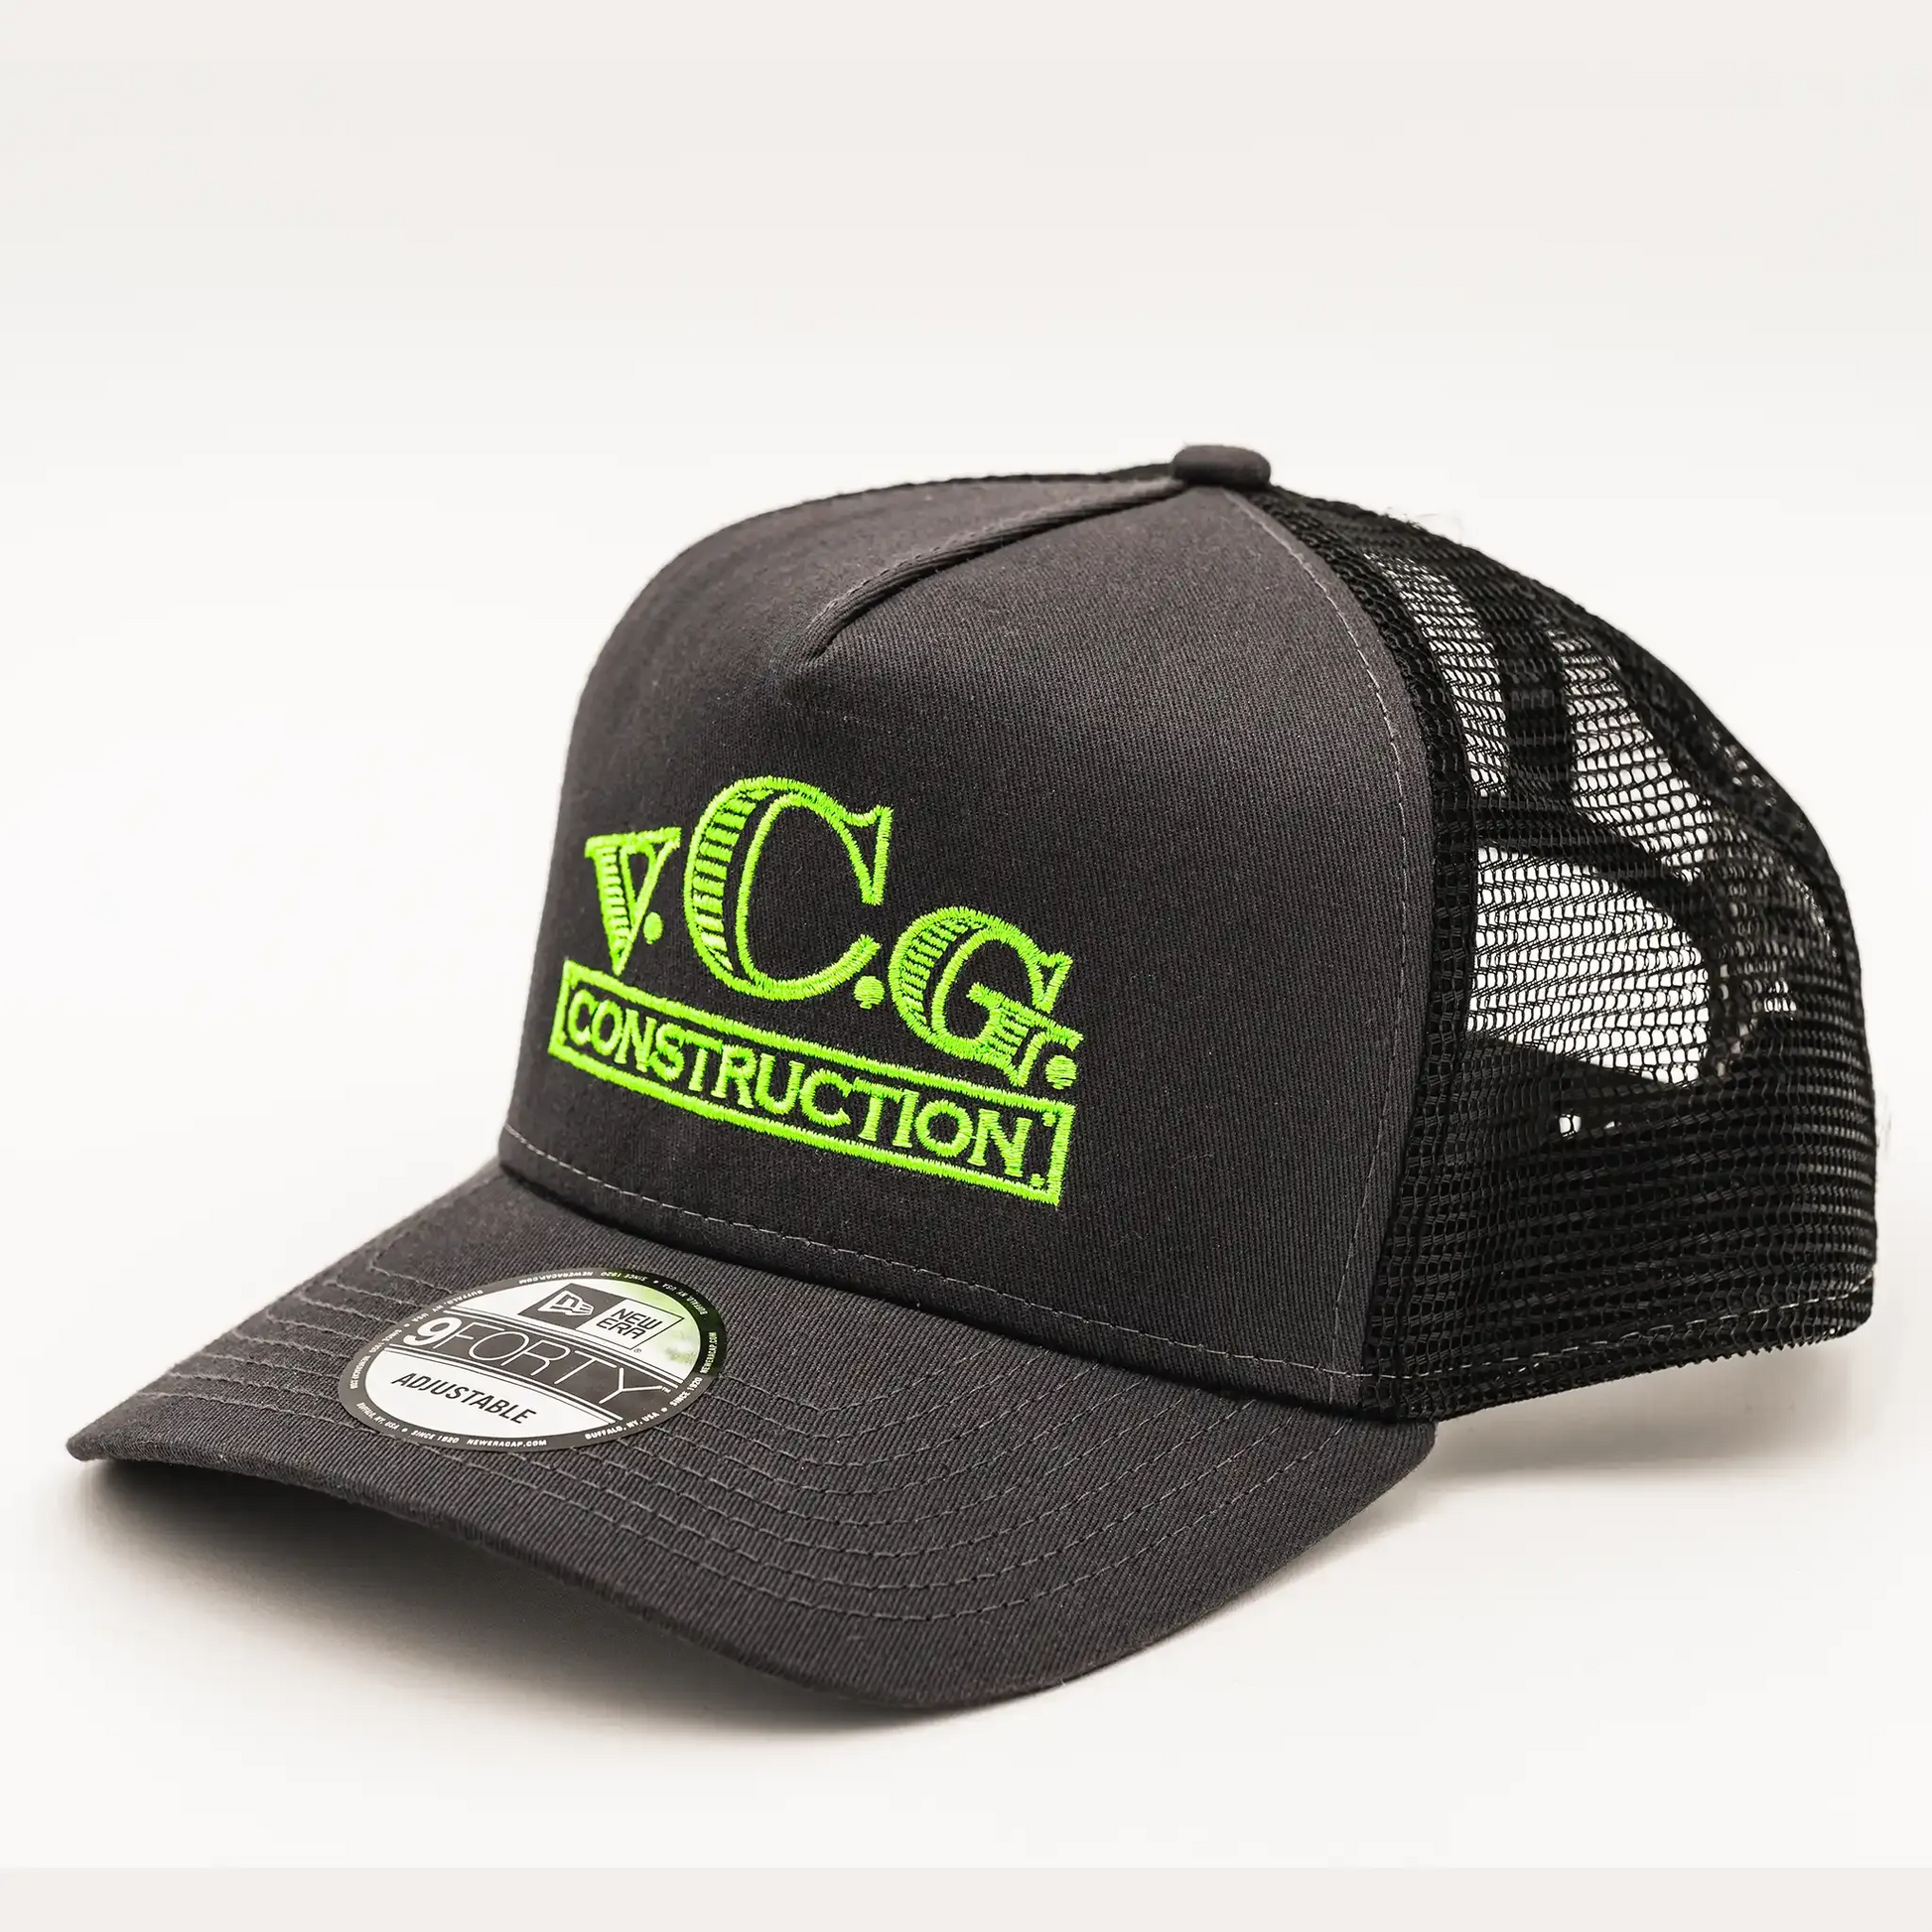 Snapback hat in graphite and black with a bold VCG Construction logo, accented by high-visibility green thread embroidery